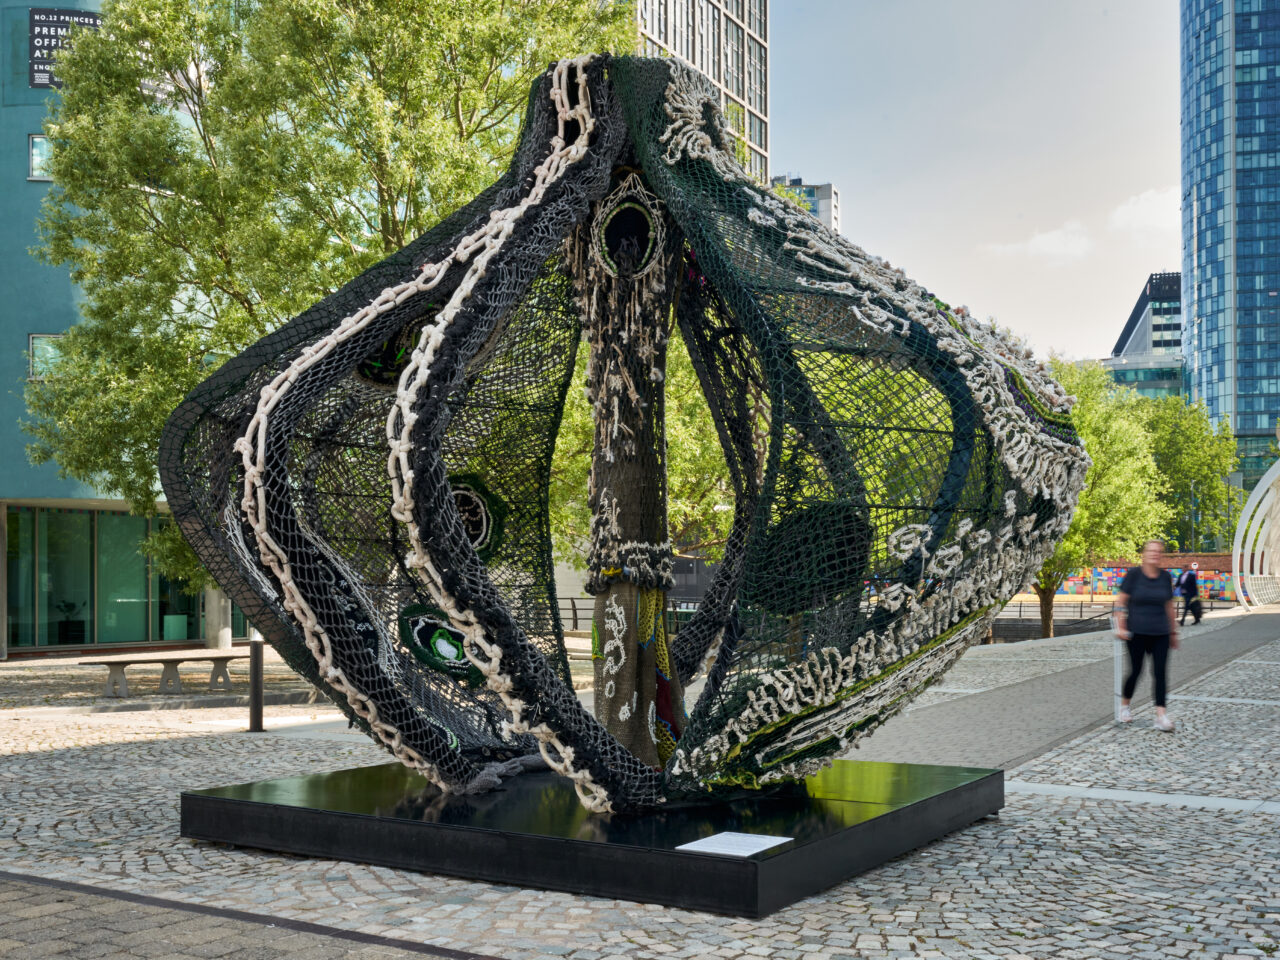 A large-scale sculpture ⁠in the shape of a vessel. The sculpture is created with steel and recycled fishing nets with hand-woven embellishment